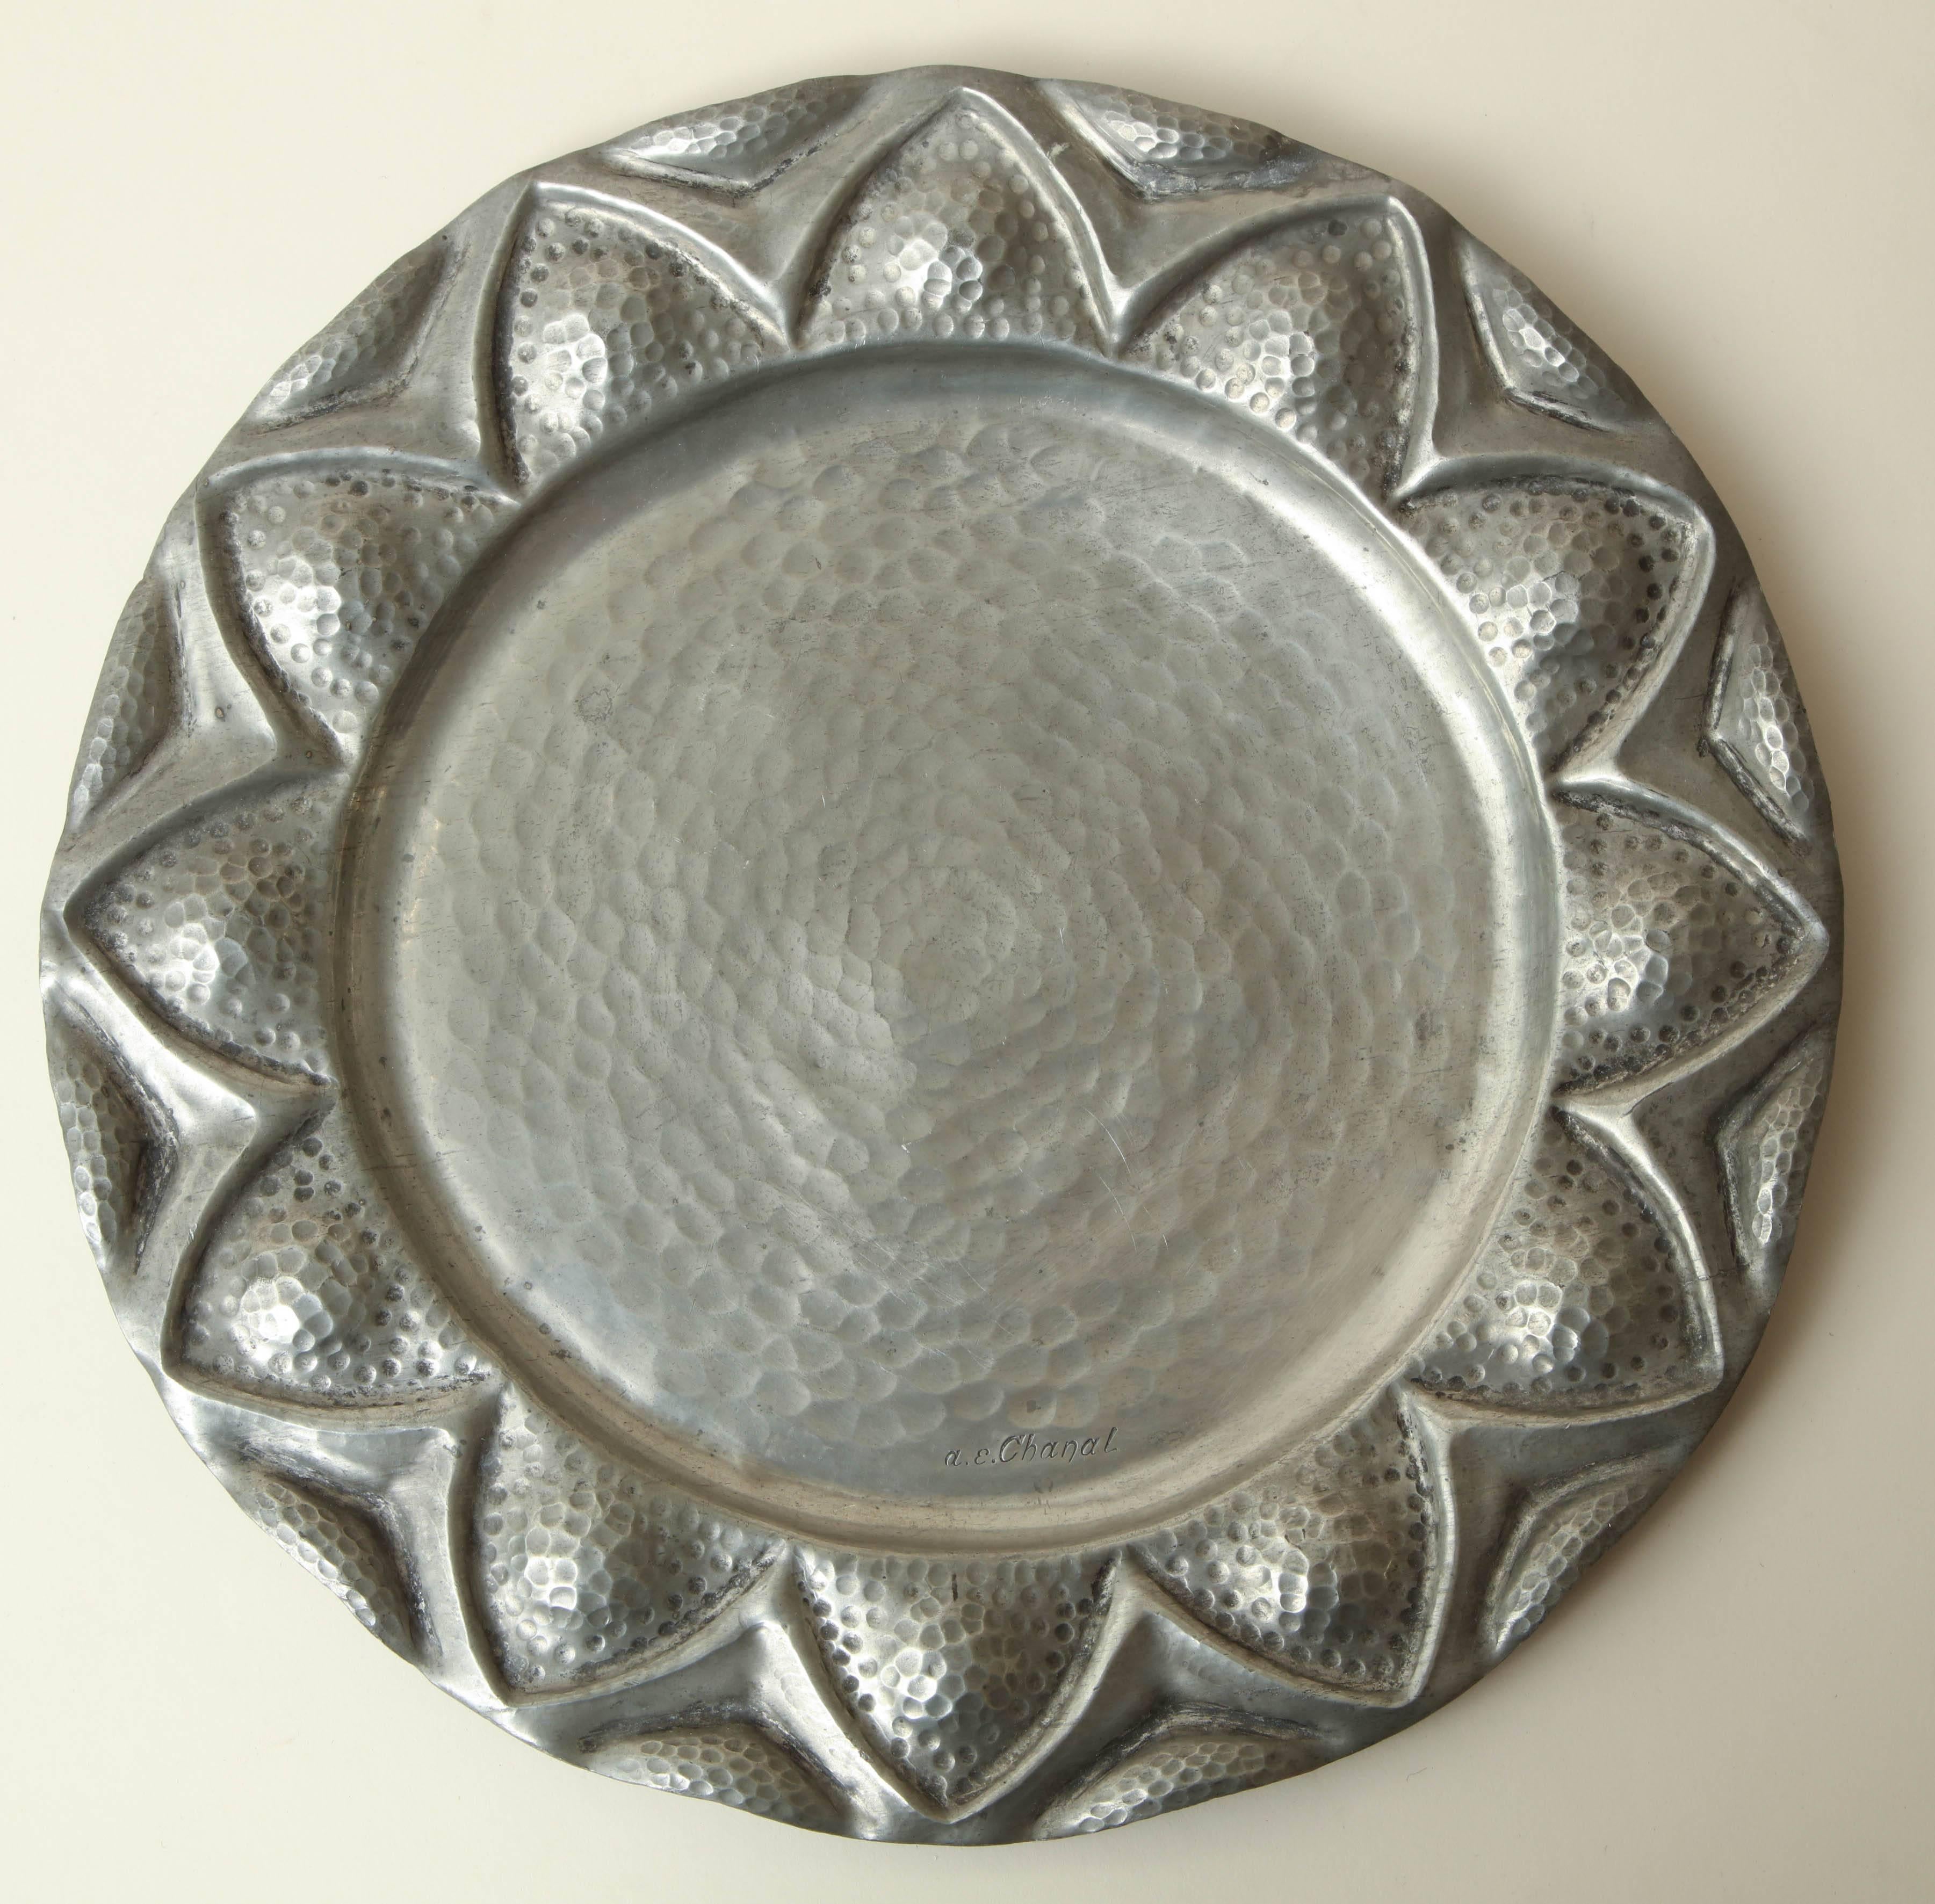 Hand-wrought dinanderie pewter plate with border of triangles around circumference.
Inscribed a.e. Chanal on top.
  